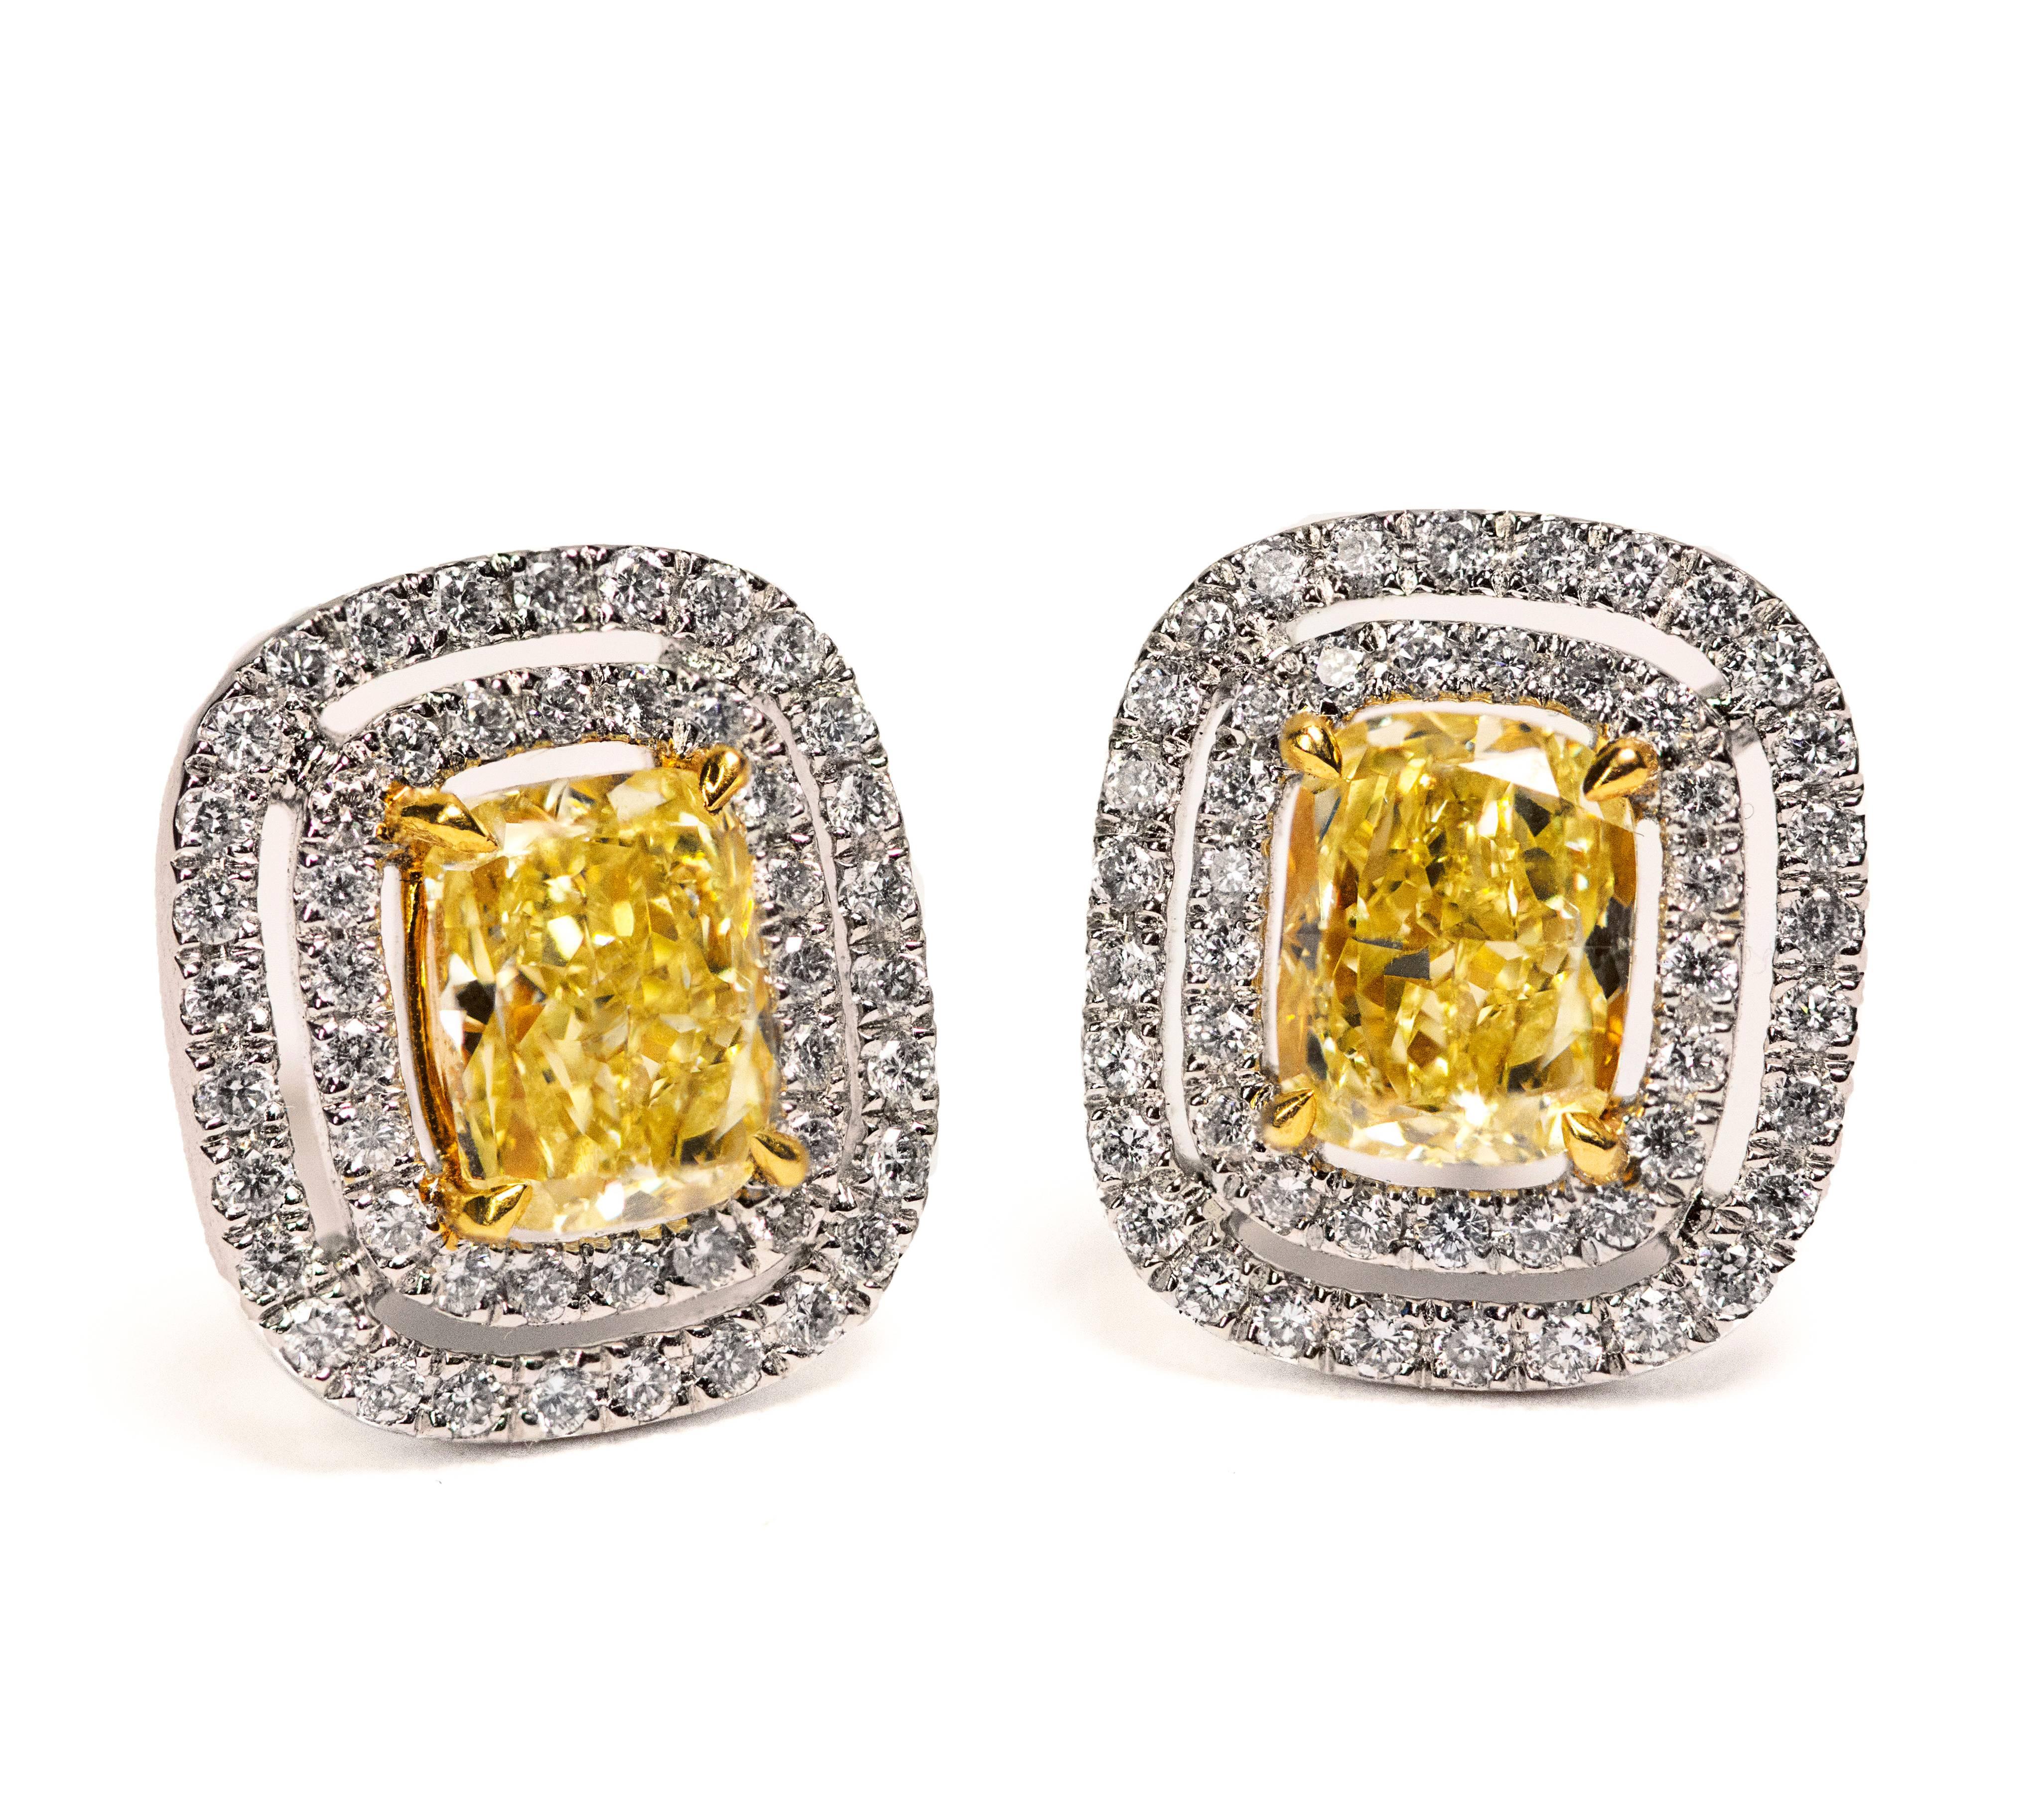 A classy and color-rich stud earrings features two cushion cut yellow diamonds weighing 1.01 and 1.03 carats total certified by GIA as Fancy Yellow in color and VVS2-VS2 in clarity. Set in four prong 18K yellow gold.  Each yellow diamond is